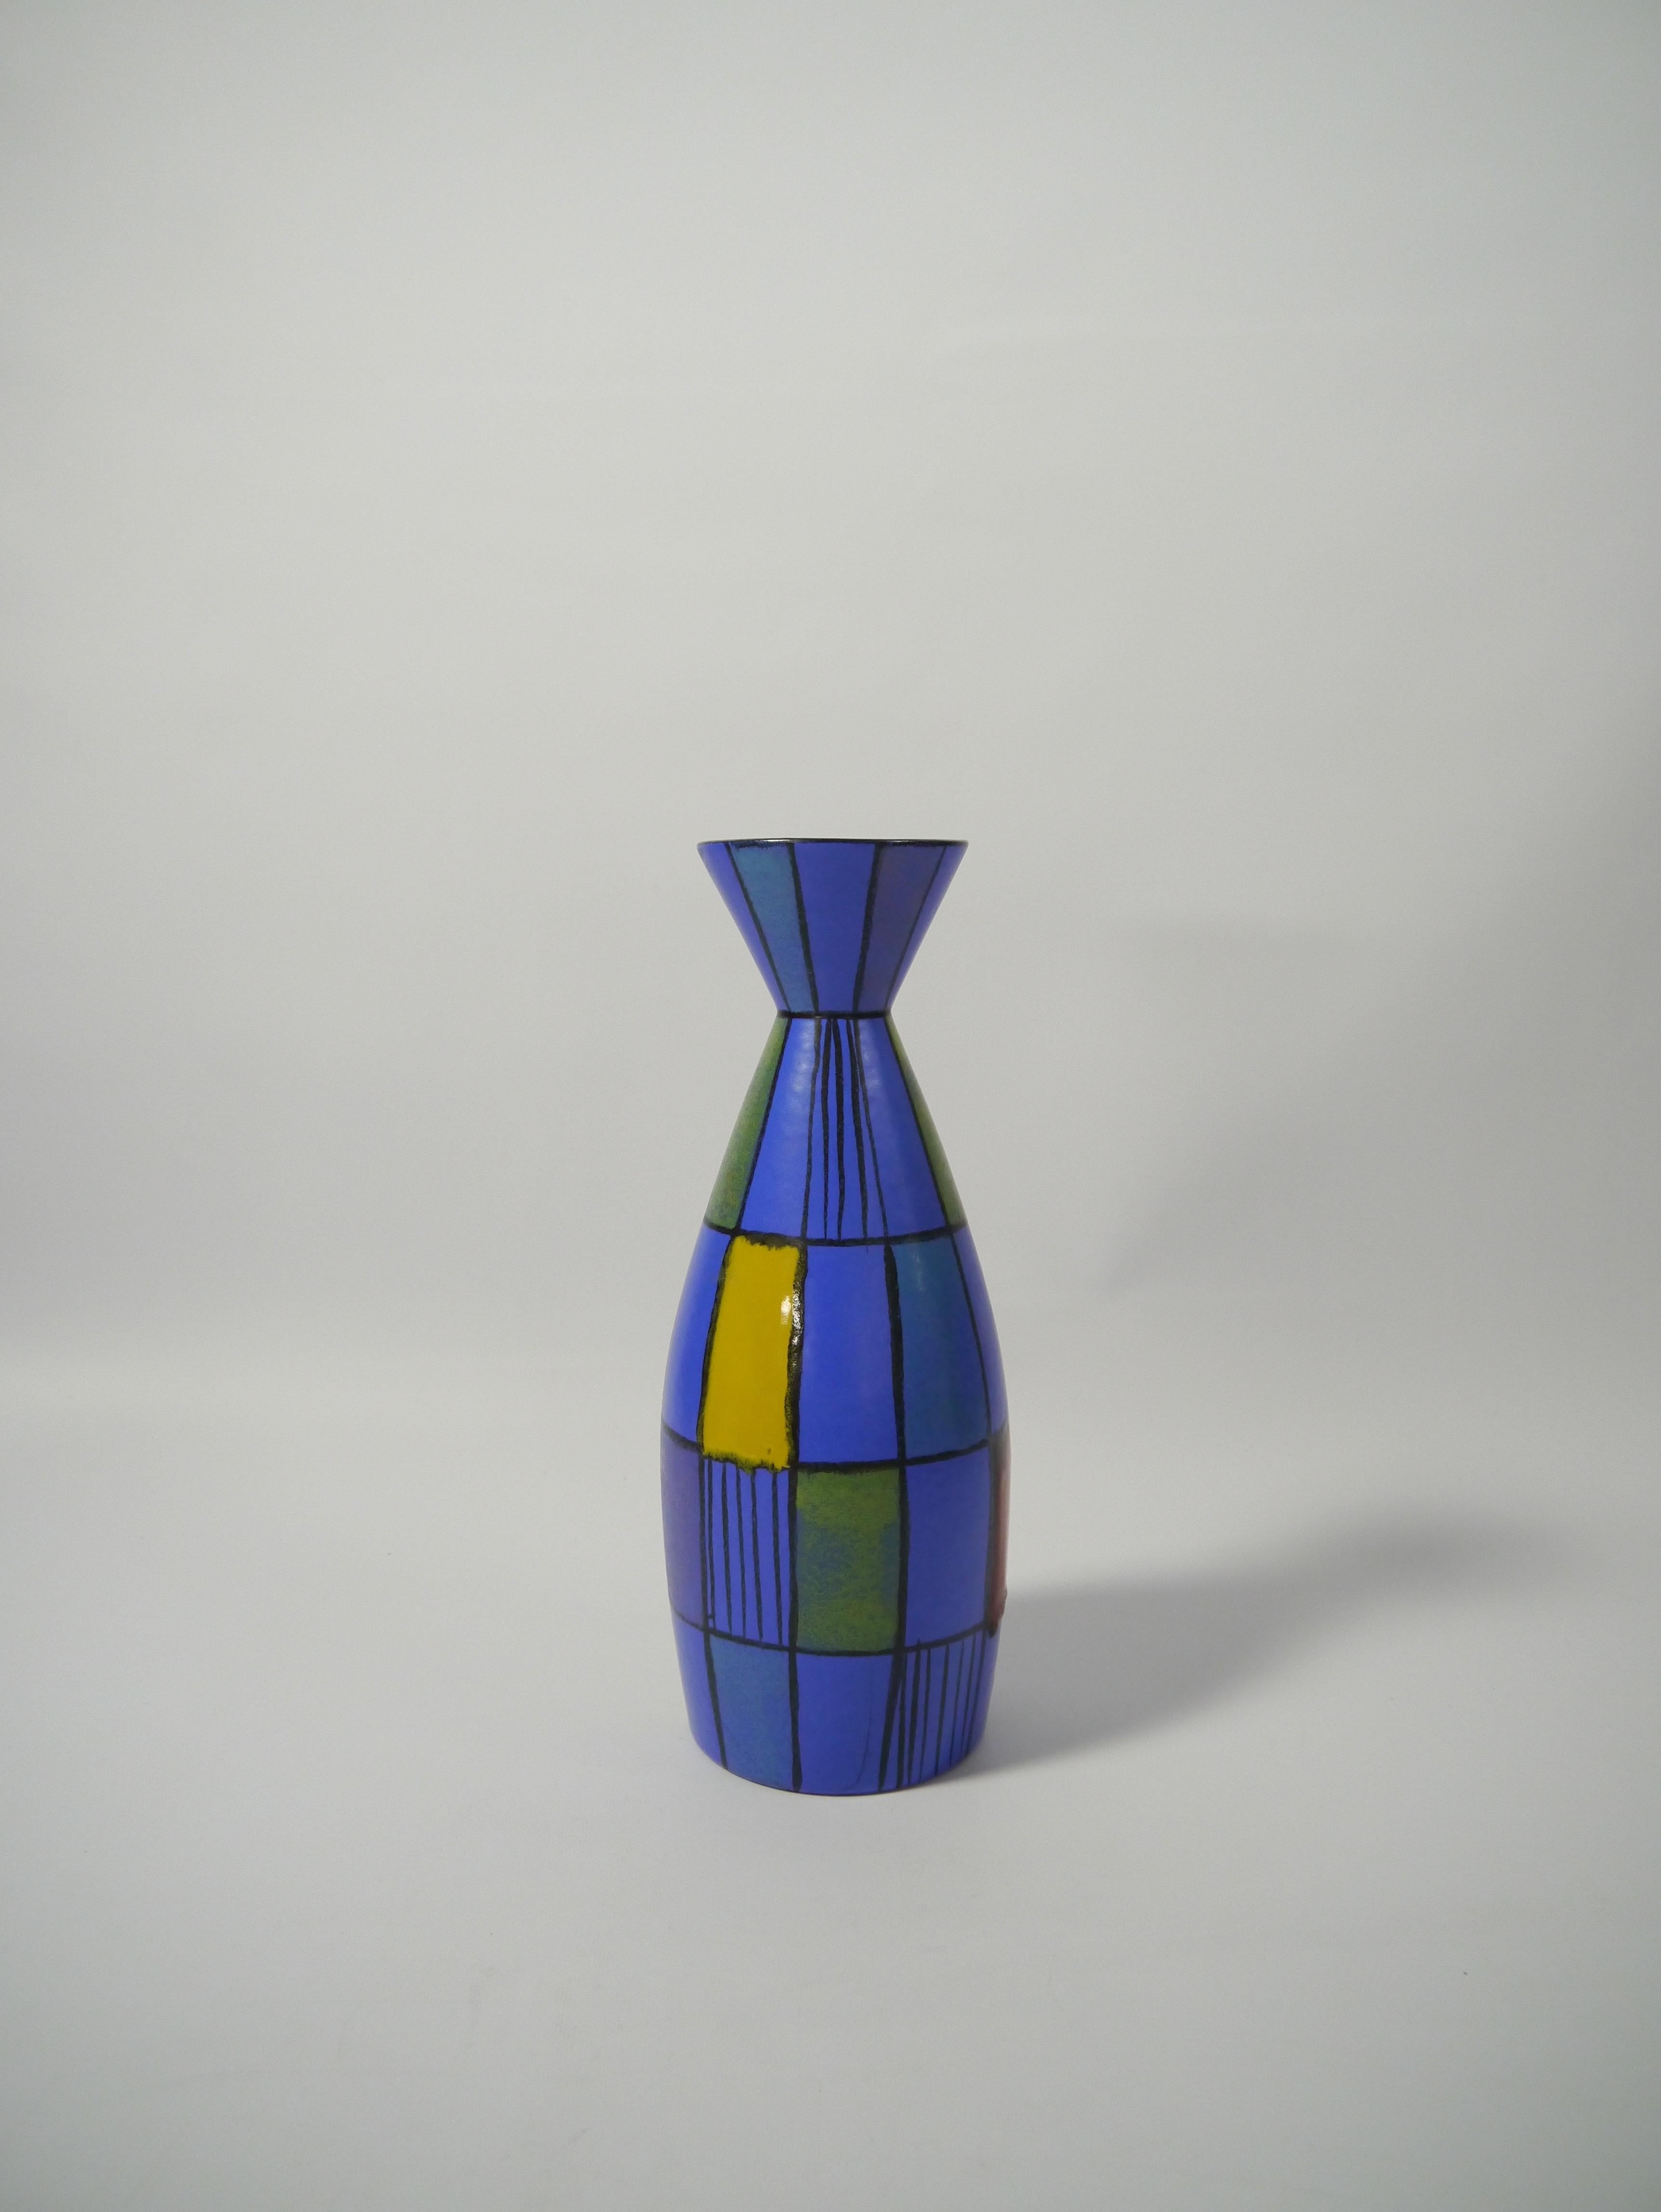 Large and rare West Germany pottery vase, made by BAY Keramik, 1960s. Marked West Germany 1016-33. Designed by Bodo Mans in his 